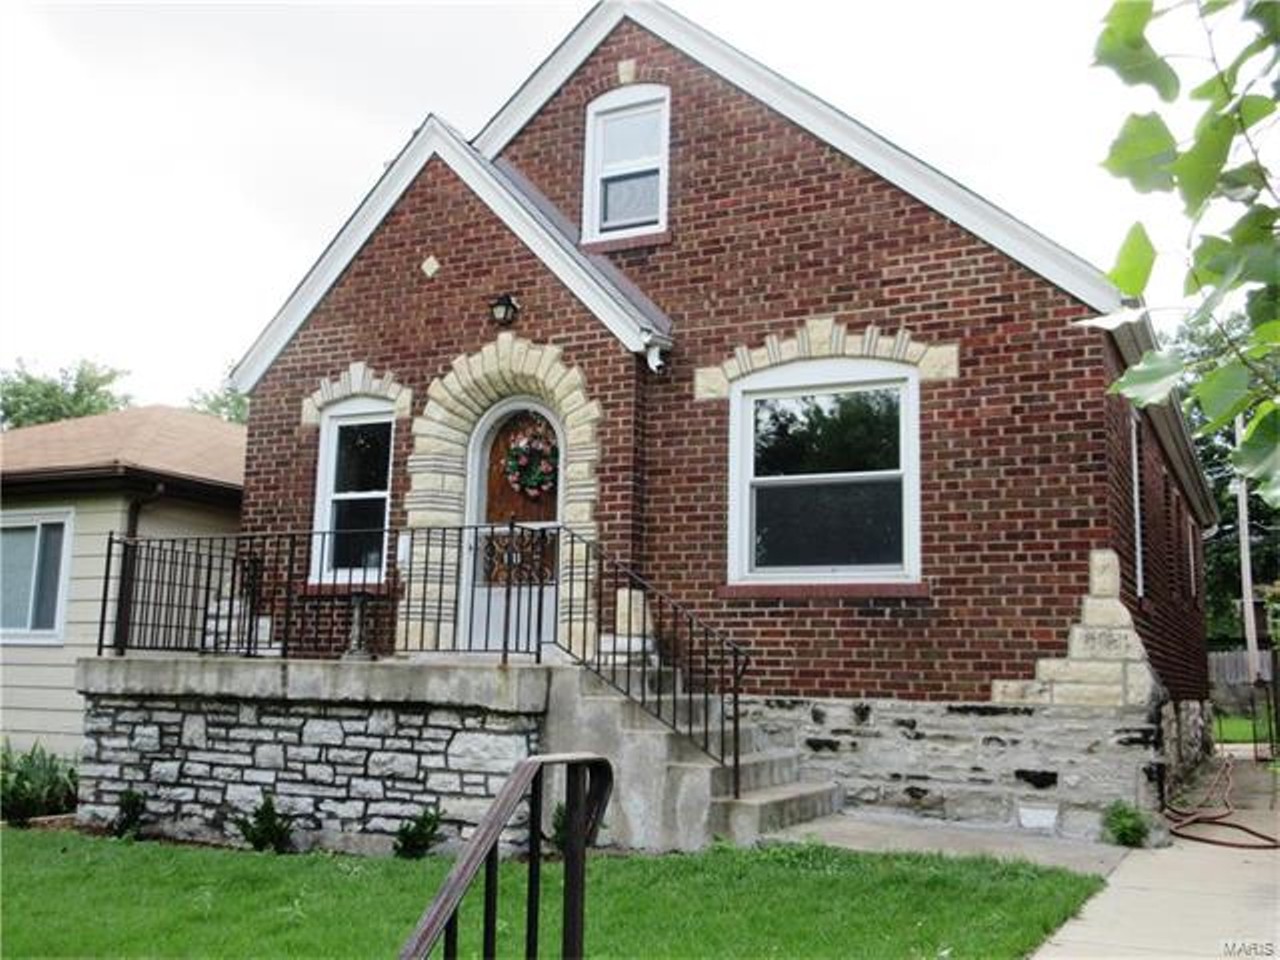 1511 Graham
St Louis, MO 63139
$147,900
4 beds, 2 baths, 1,350 sqft
The price has been reduced on this Dogtown home, which features thermal windows, wood floors throughout and an updated kitchen (shout out to coffee lovers: the listing describes the cabinets as "cappuccino colored"). The dishwasher, refrigerator and stove are all included with the house. You'll also have a basement, a parking pad, a fenced backyard and a storage shed that could even fit your car.